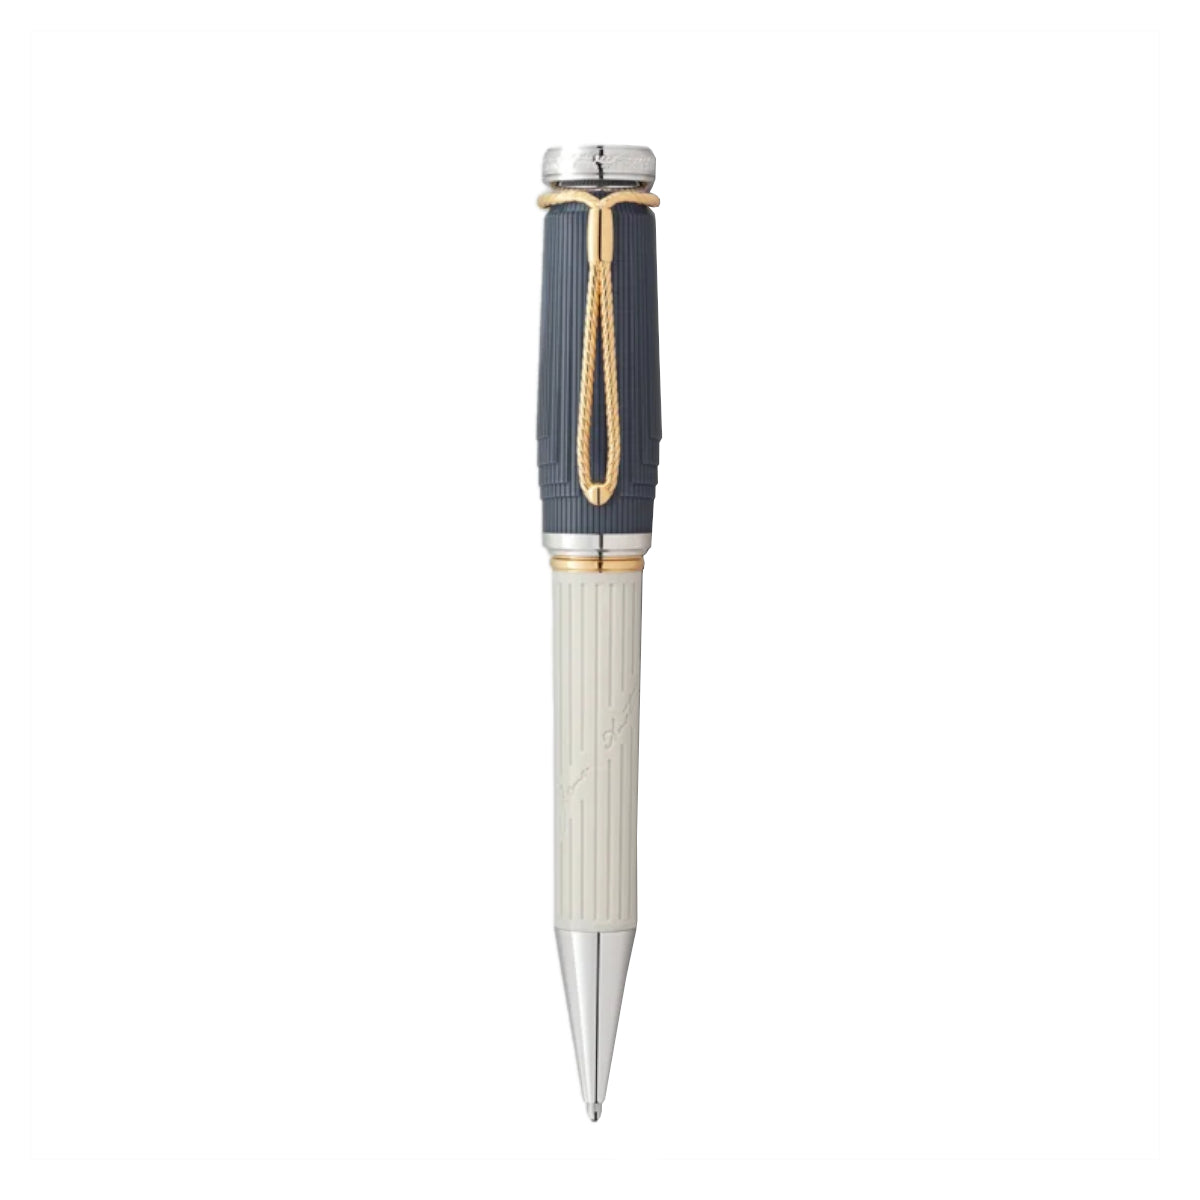 Stylo bille Writers Edition Hommage à Jane Austen Limited Edition